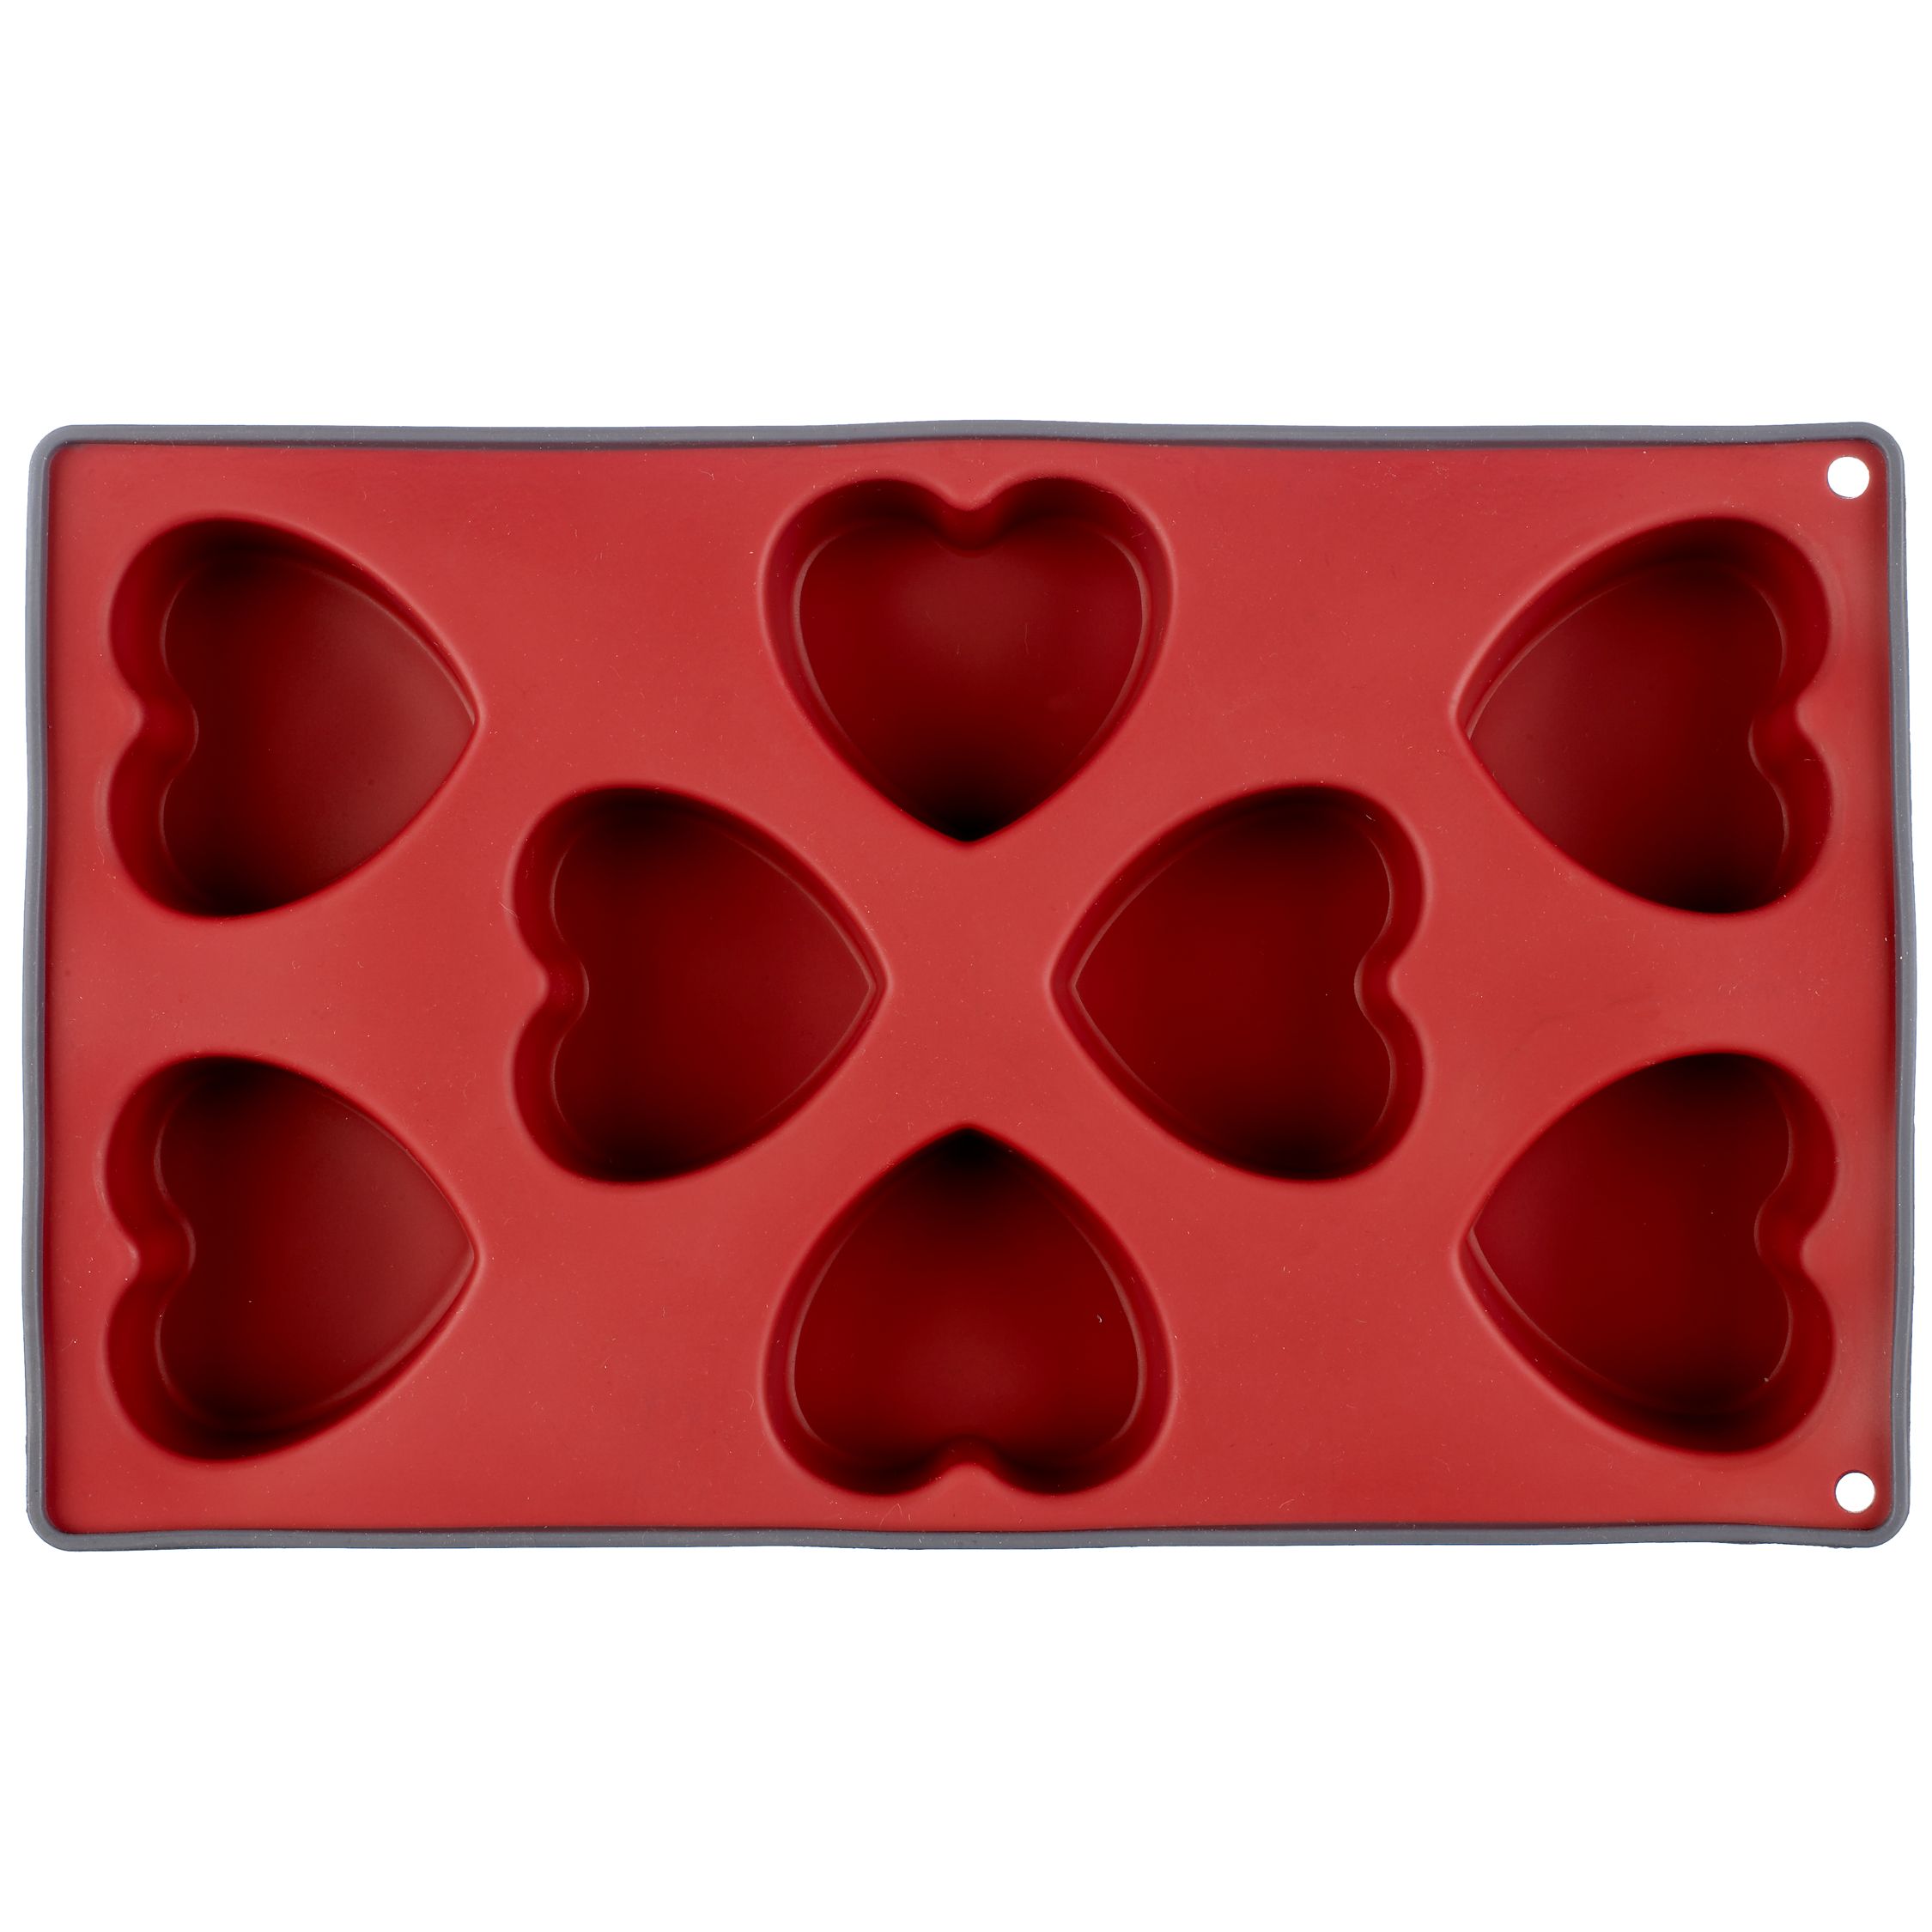 Heart 6 Cup Cake Mould, Red